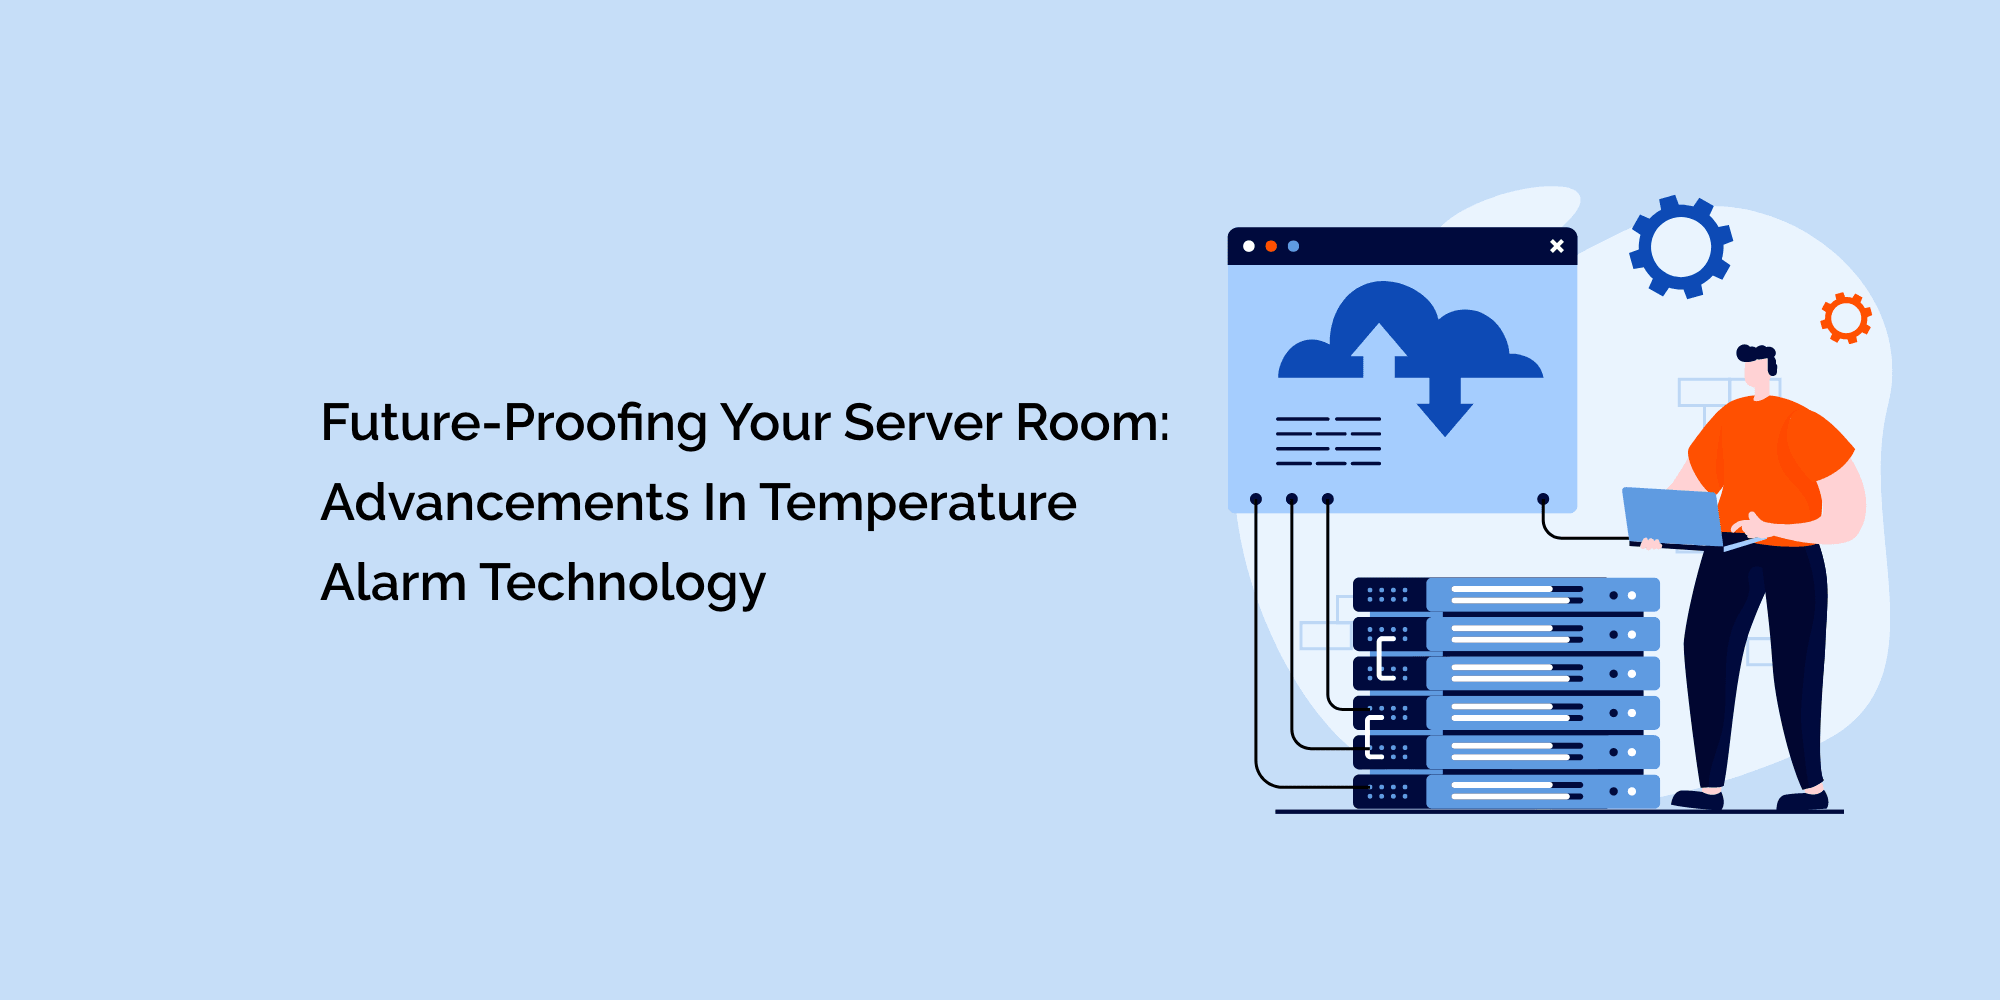 Future-proofing Your Server Room: Advancements in Temperature Alarm Technology